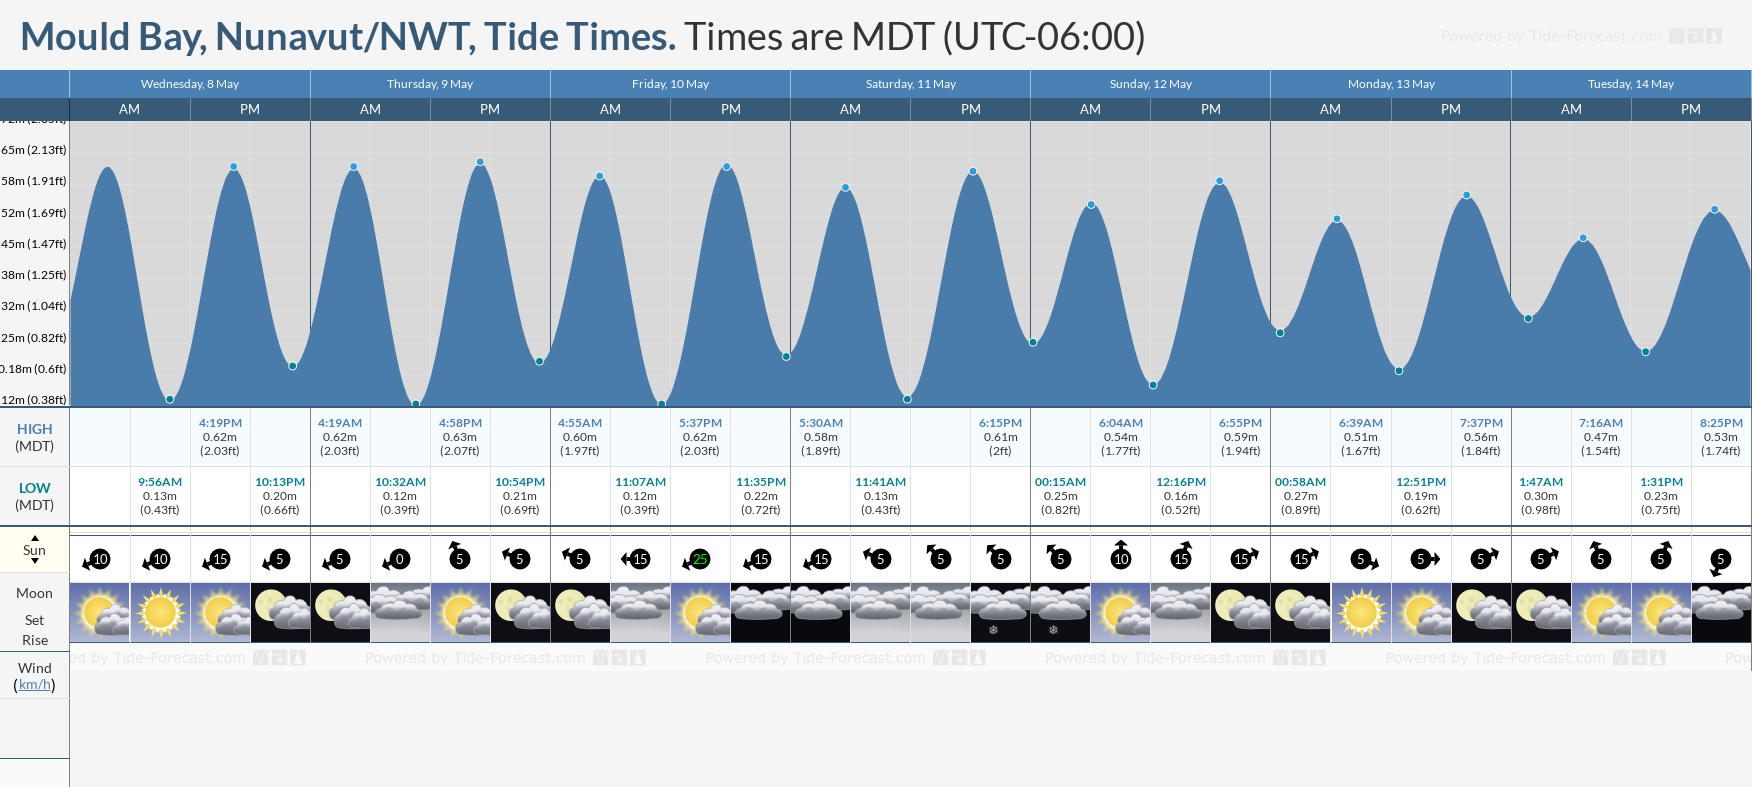 Mould Bay, Nunavut/NWT Tide Chart including high and low tide times for the next 7 days